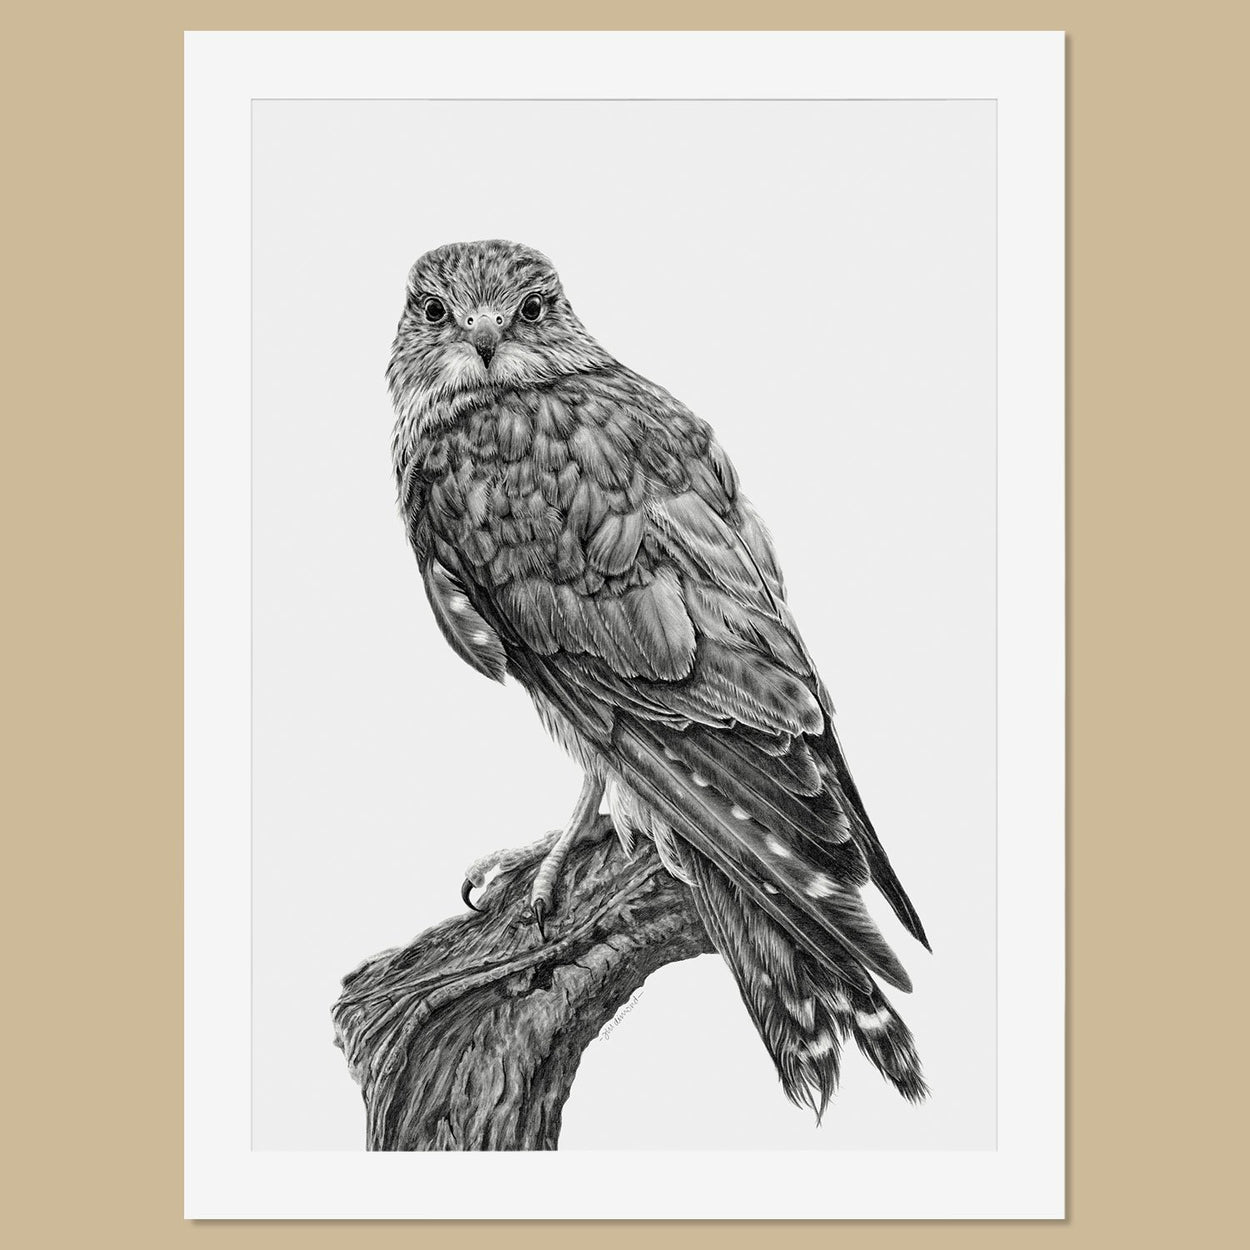 Original Female Merlin Pencil Drawing - The Thriving Wild